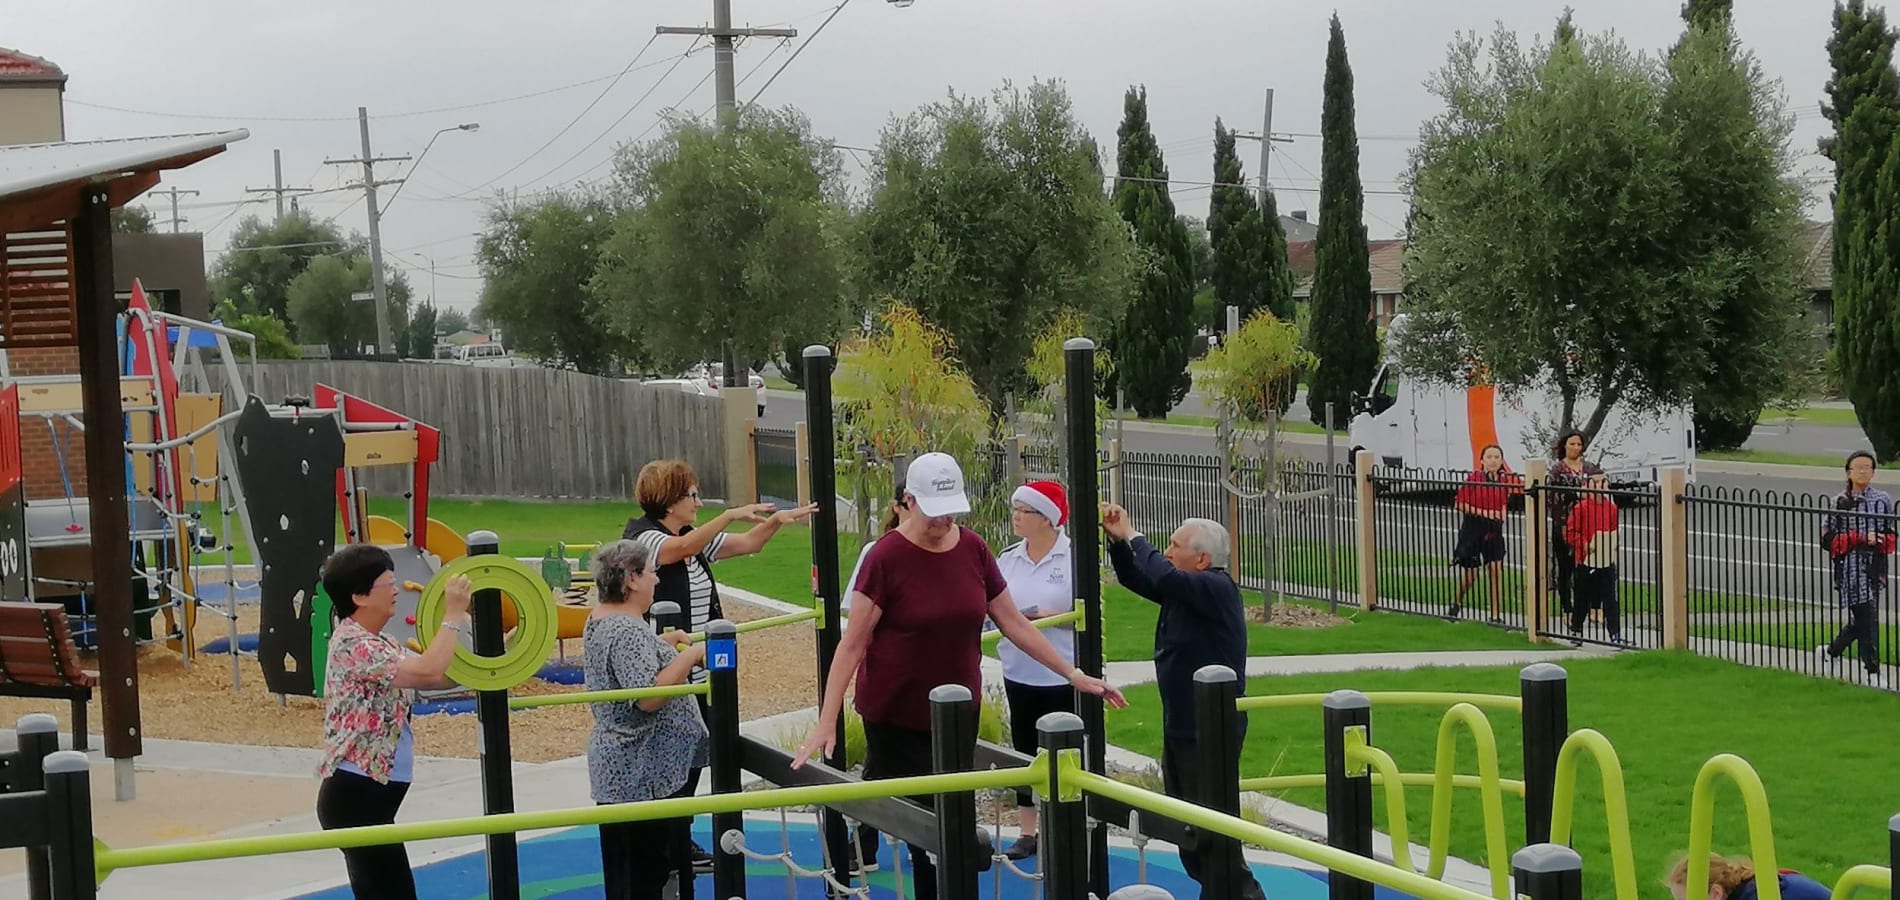 Seniors exercise parks improve physical and mental health of older people: research